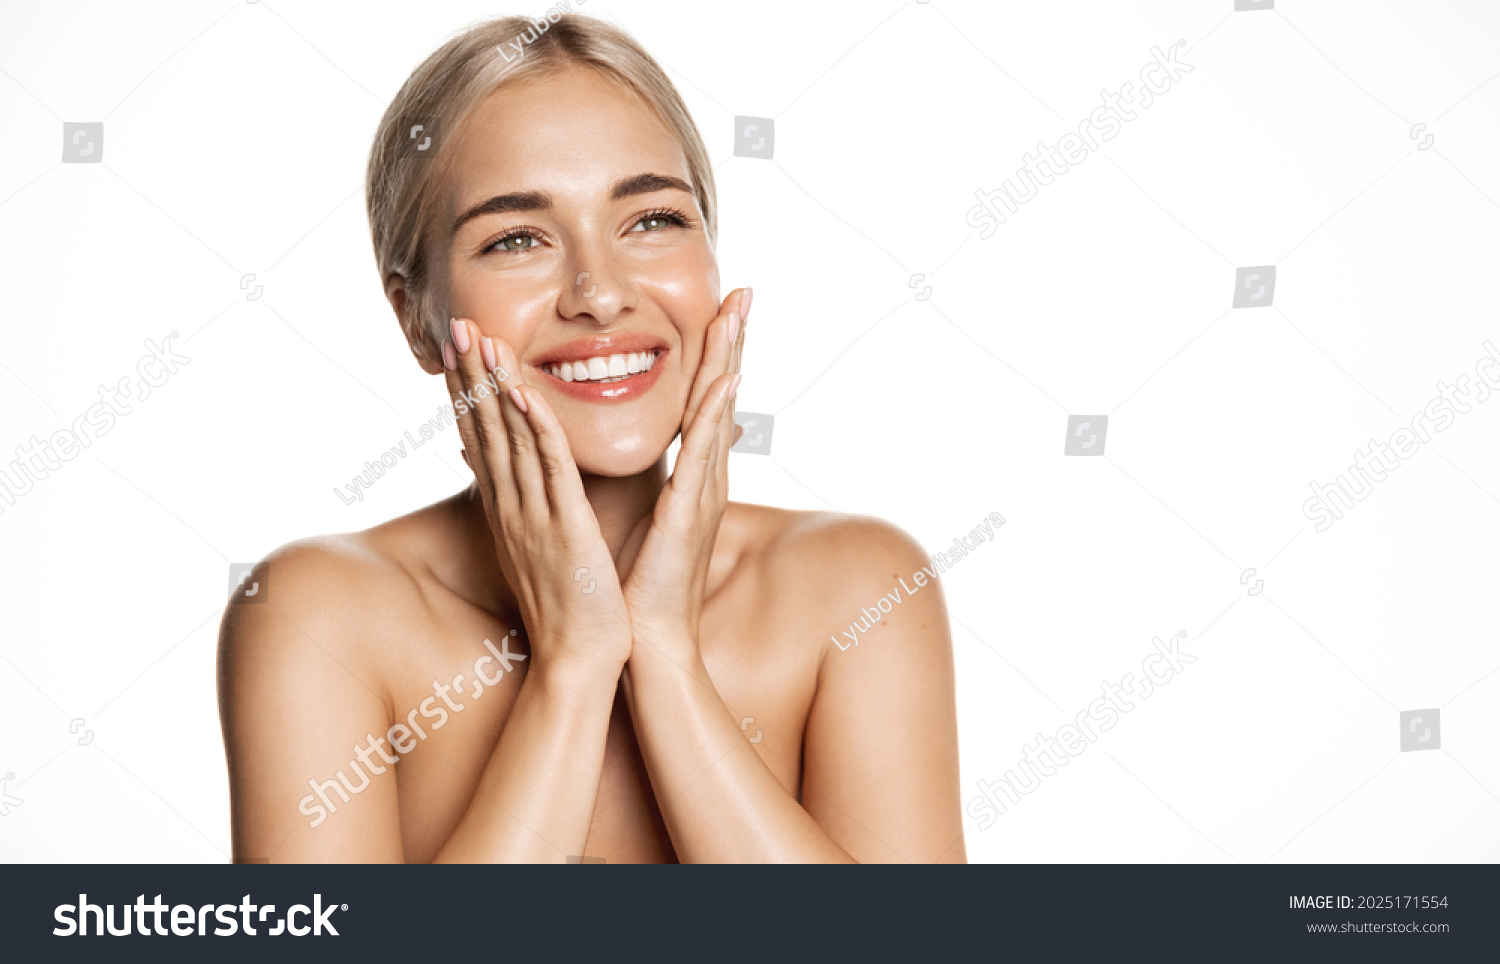 Spa and cosmetology. Young blond woman smiling happy, looking up, holding hands on face, apply moisturizing cream, face lotion or toner, white background #2025171554